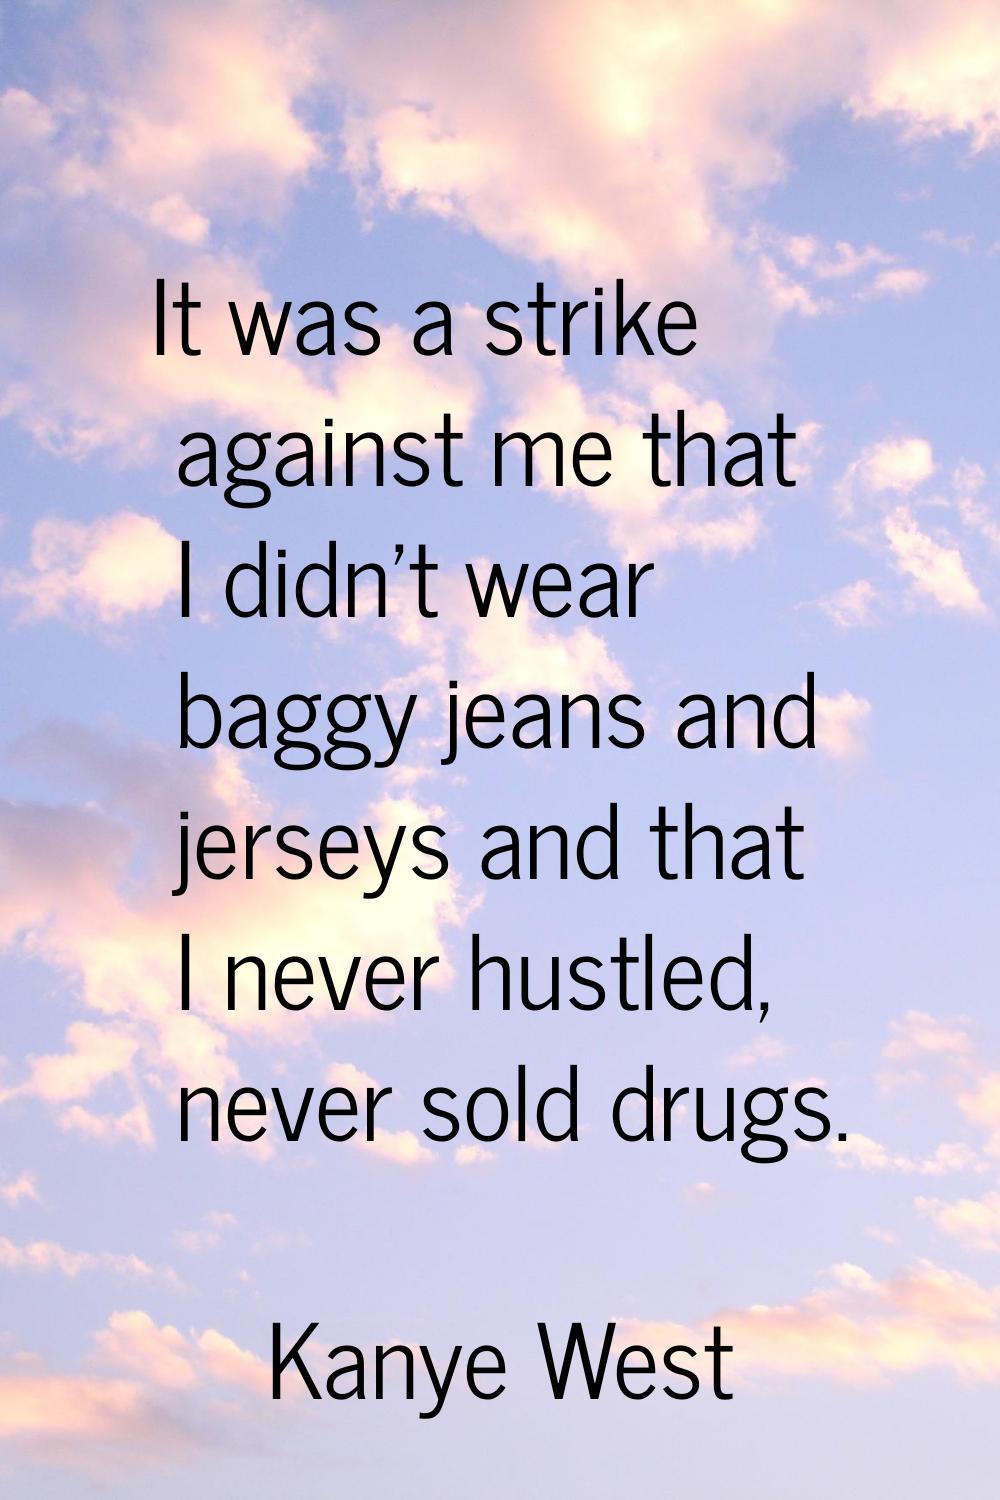 It was a strike against me that I didn't wear baggy jeans and jerseys and that I never hustled, nev